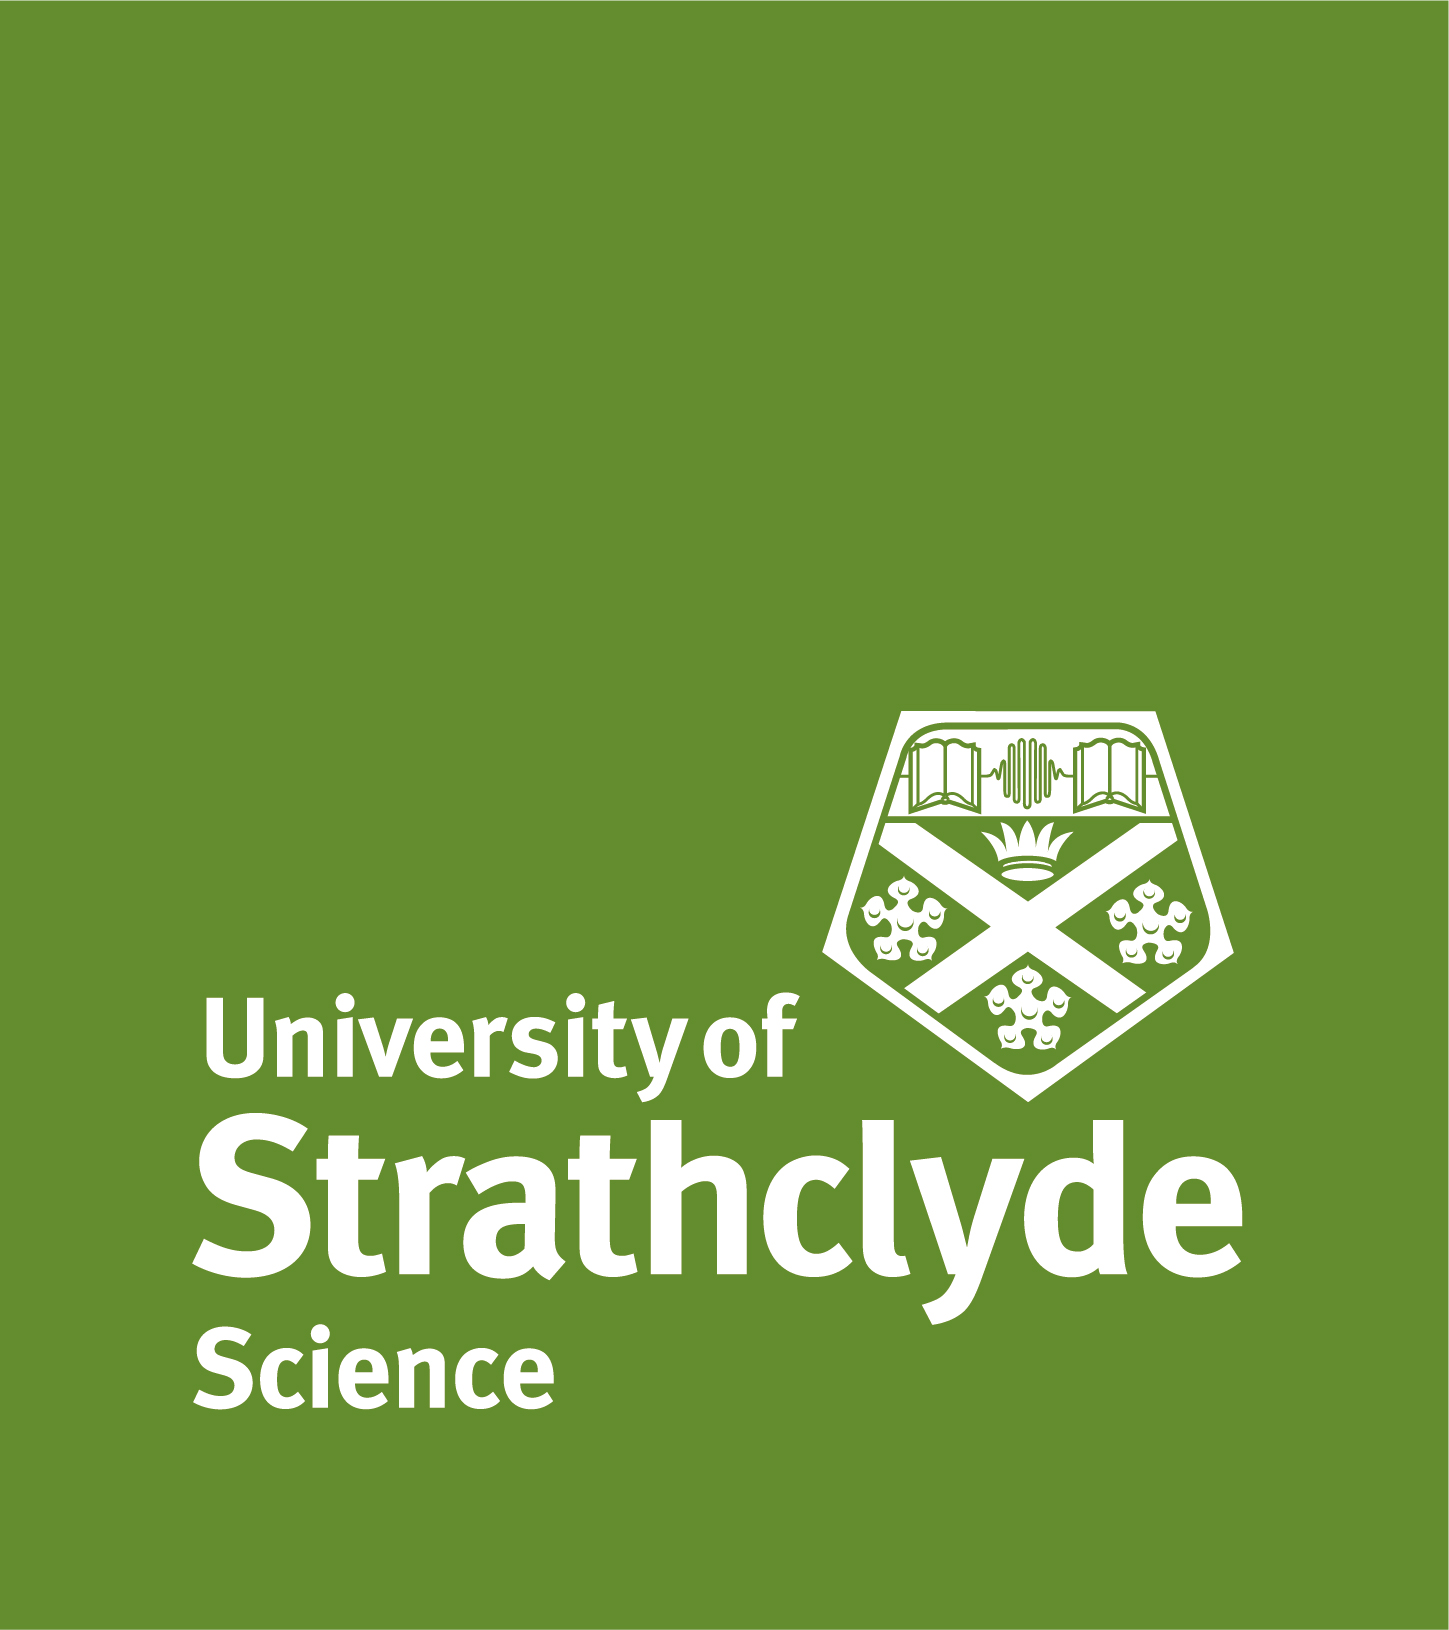 Green background with the university logo and the words University of Strathclyde Science white text